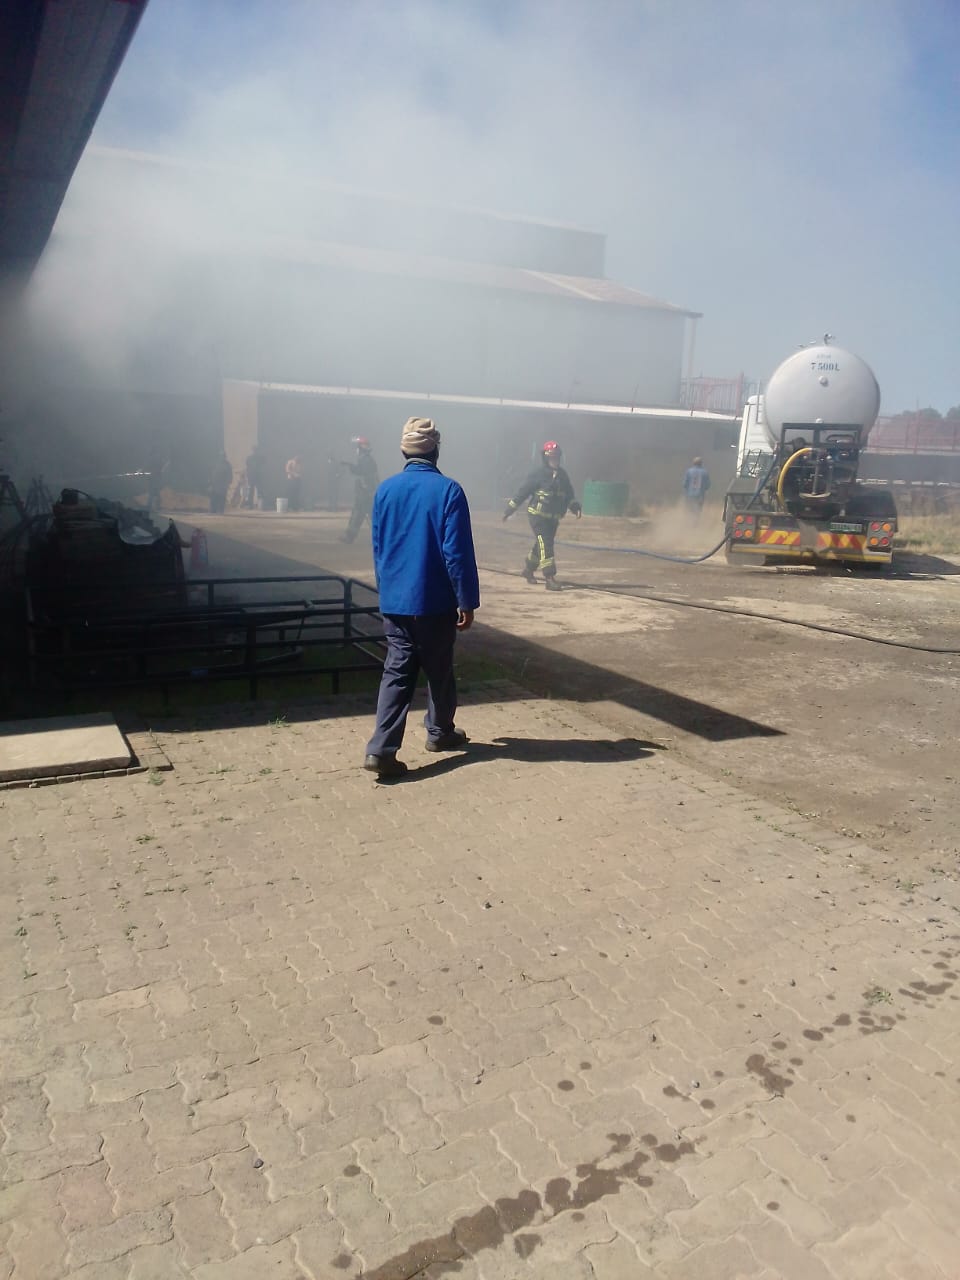 Structural fire on Tannery Road in Bloemfontein